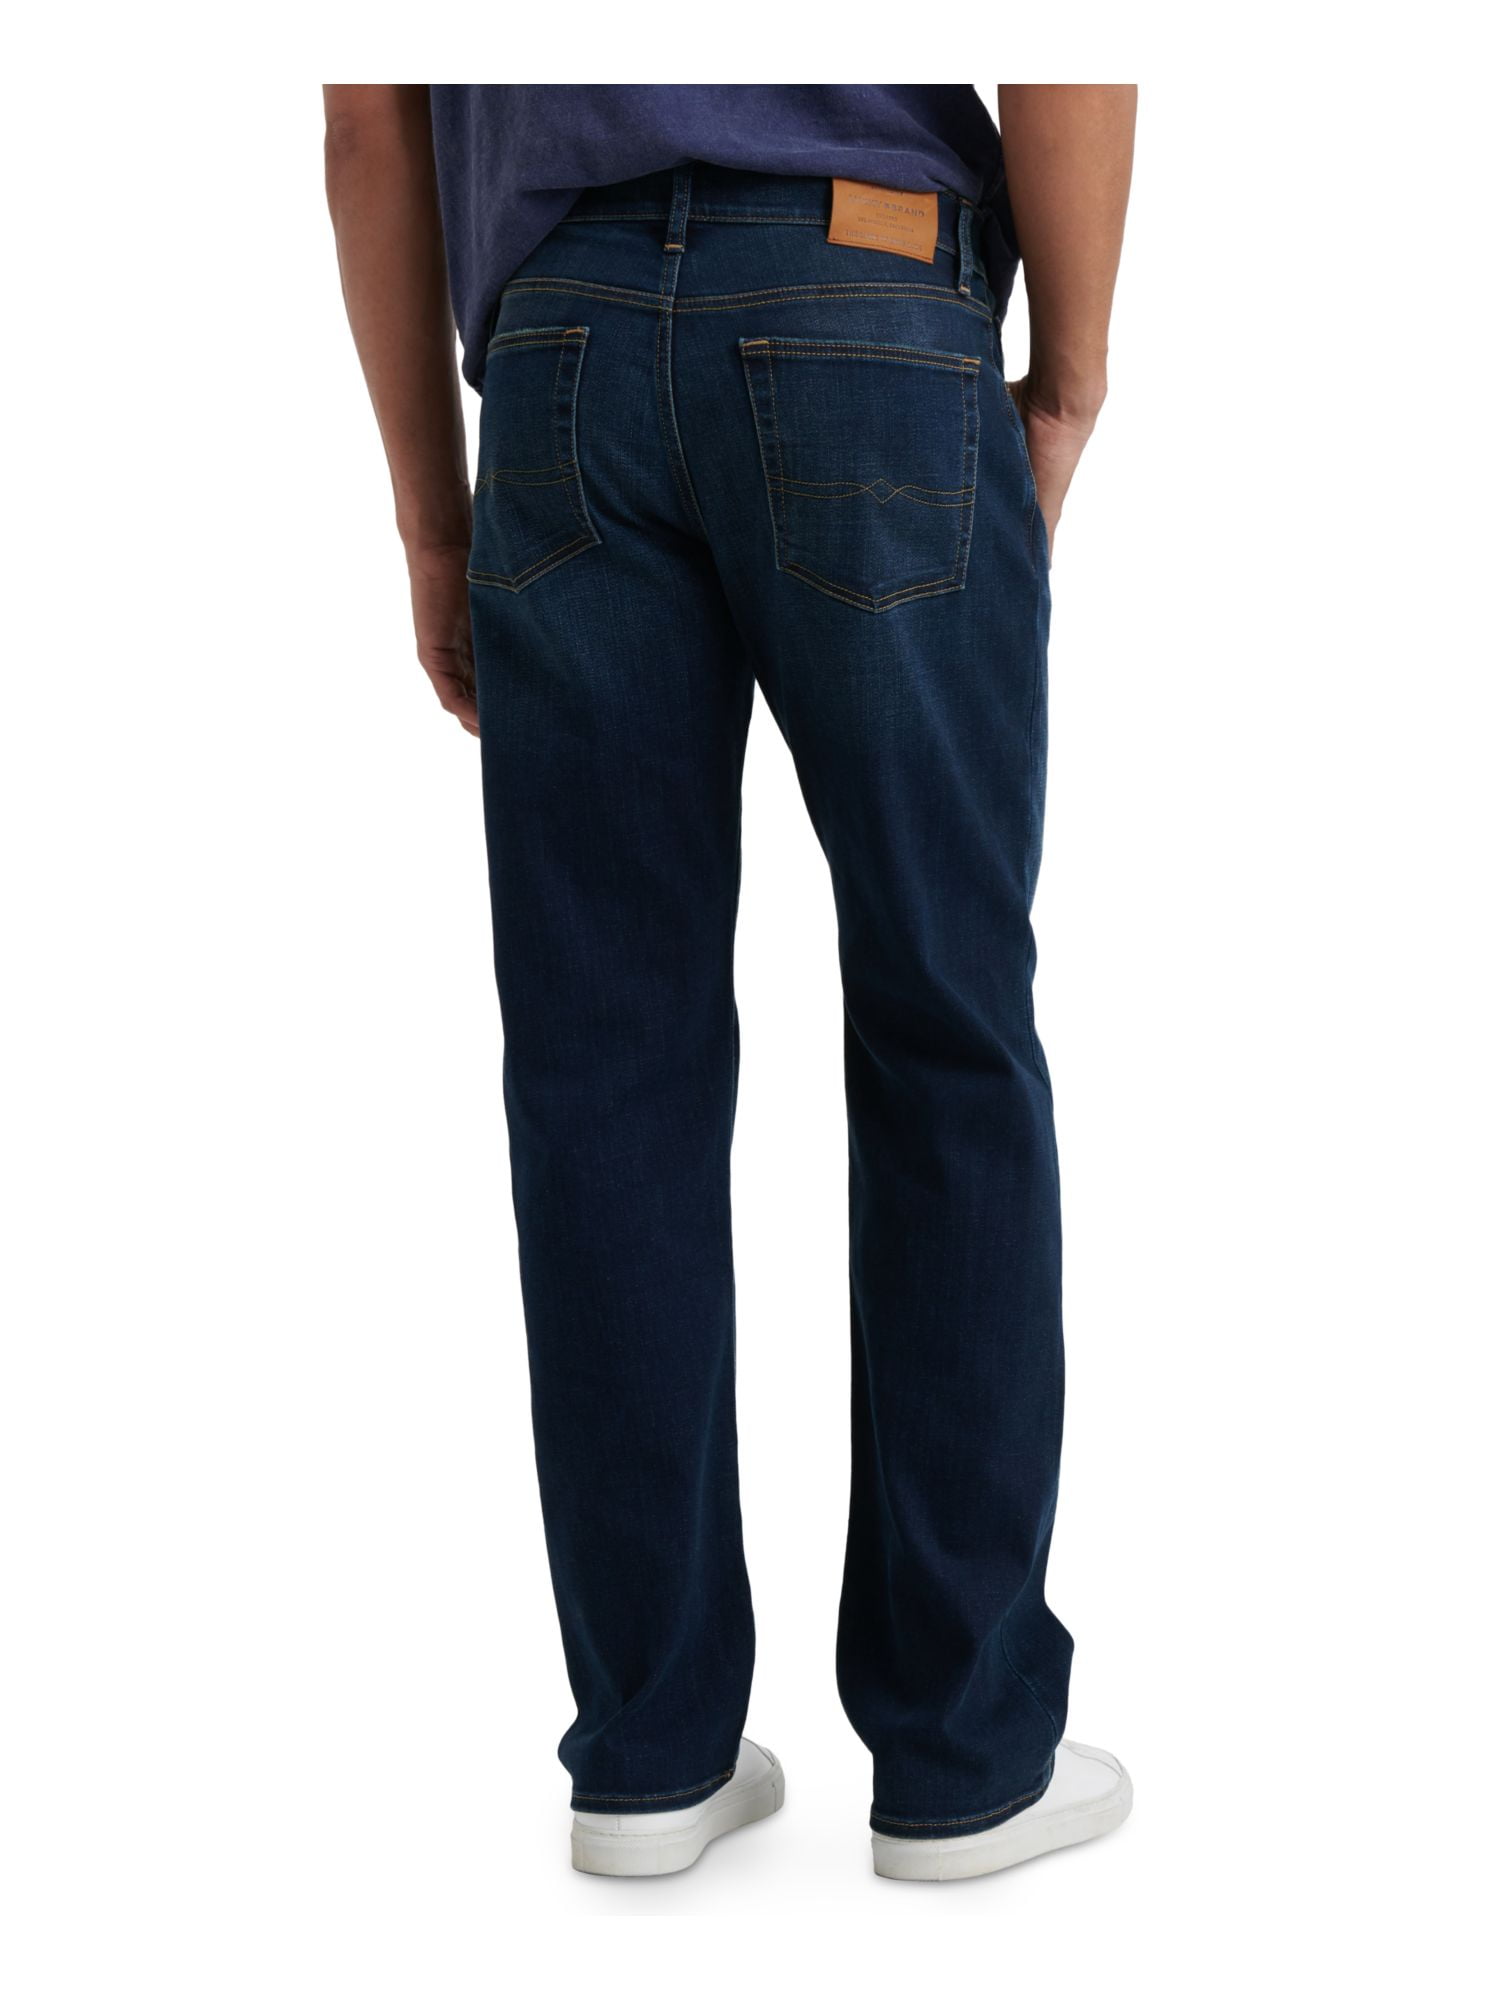 Men's Straight Jeans: Distressed & Stretch Fit Jeans